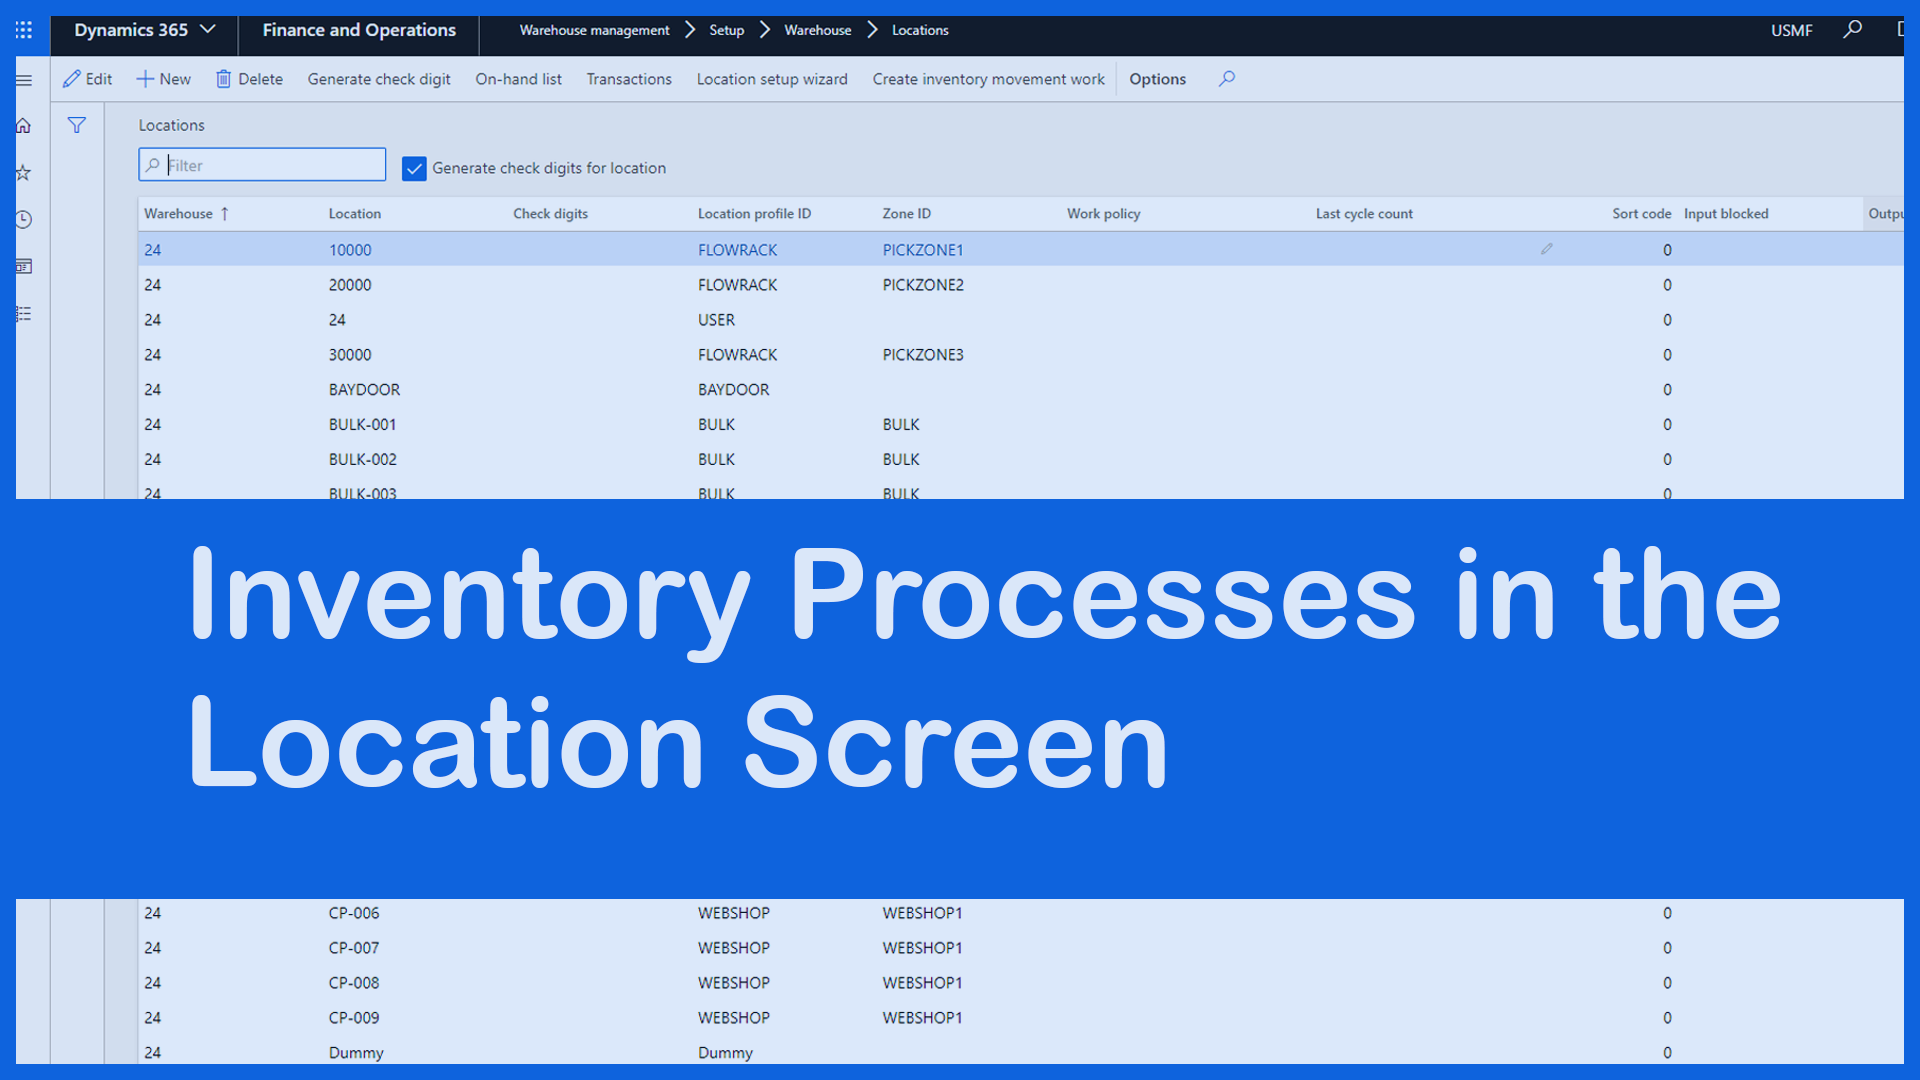 You are currently viewing Inventory Processes using the Location screen in Dynamics 365